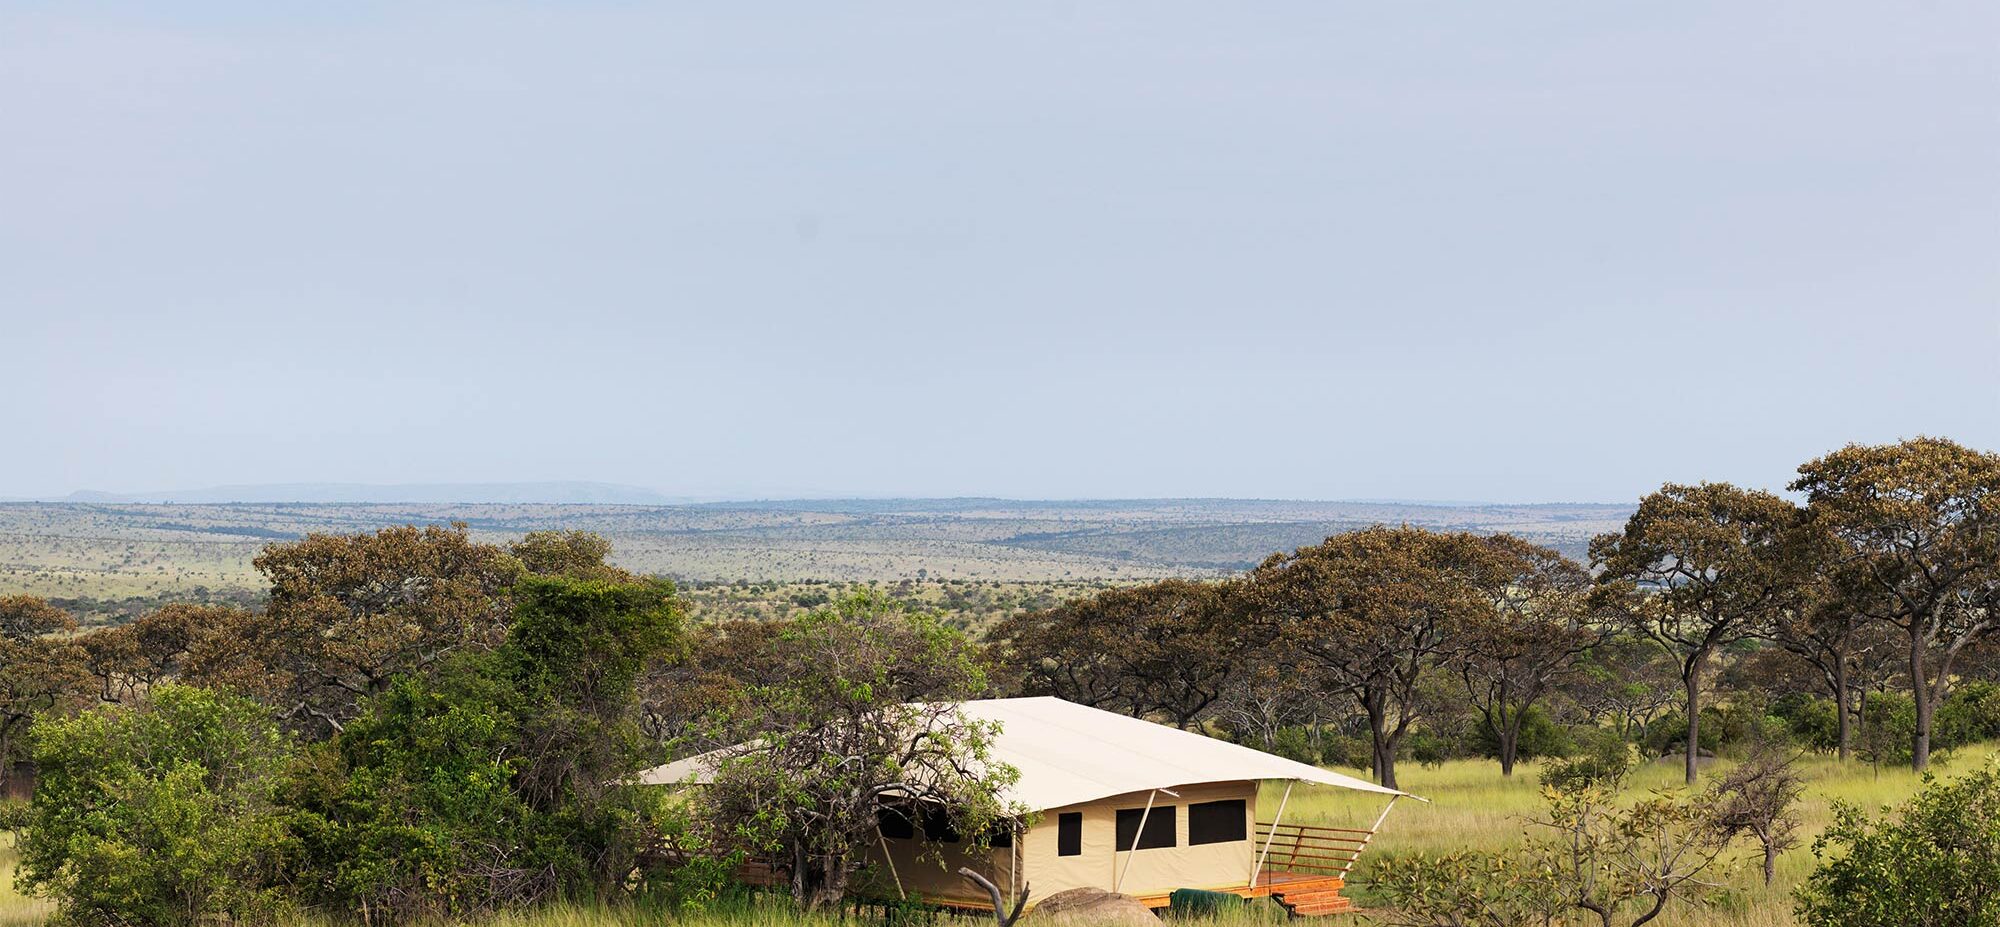 Serengeti tent nestled in the grass and trees